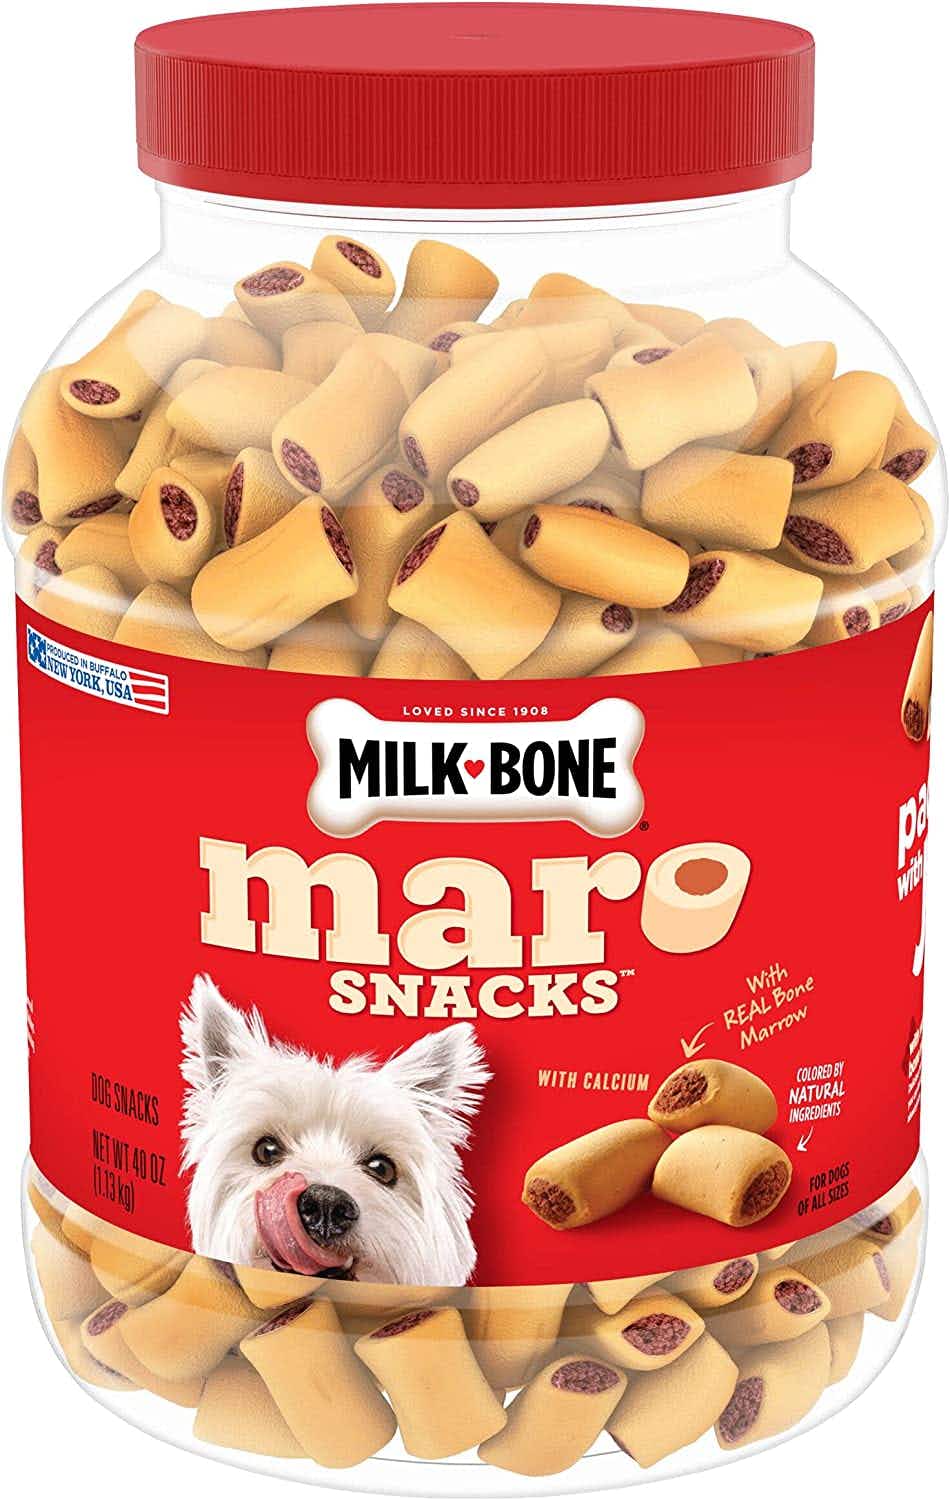 A container of Milk-Bone MaroSnacks on a white background.